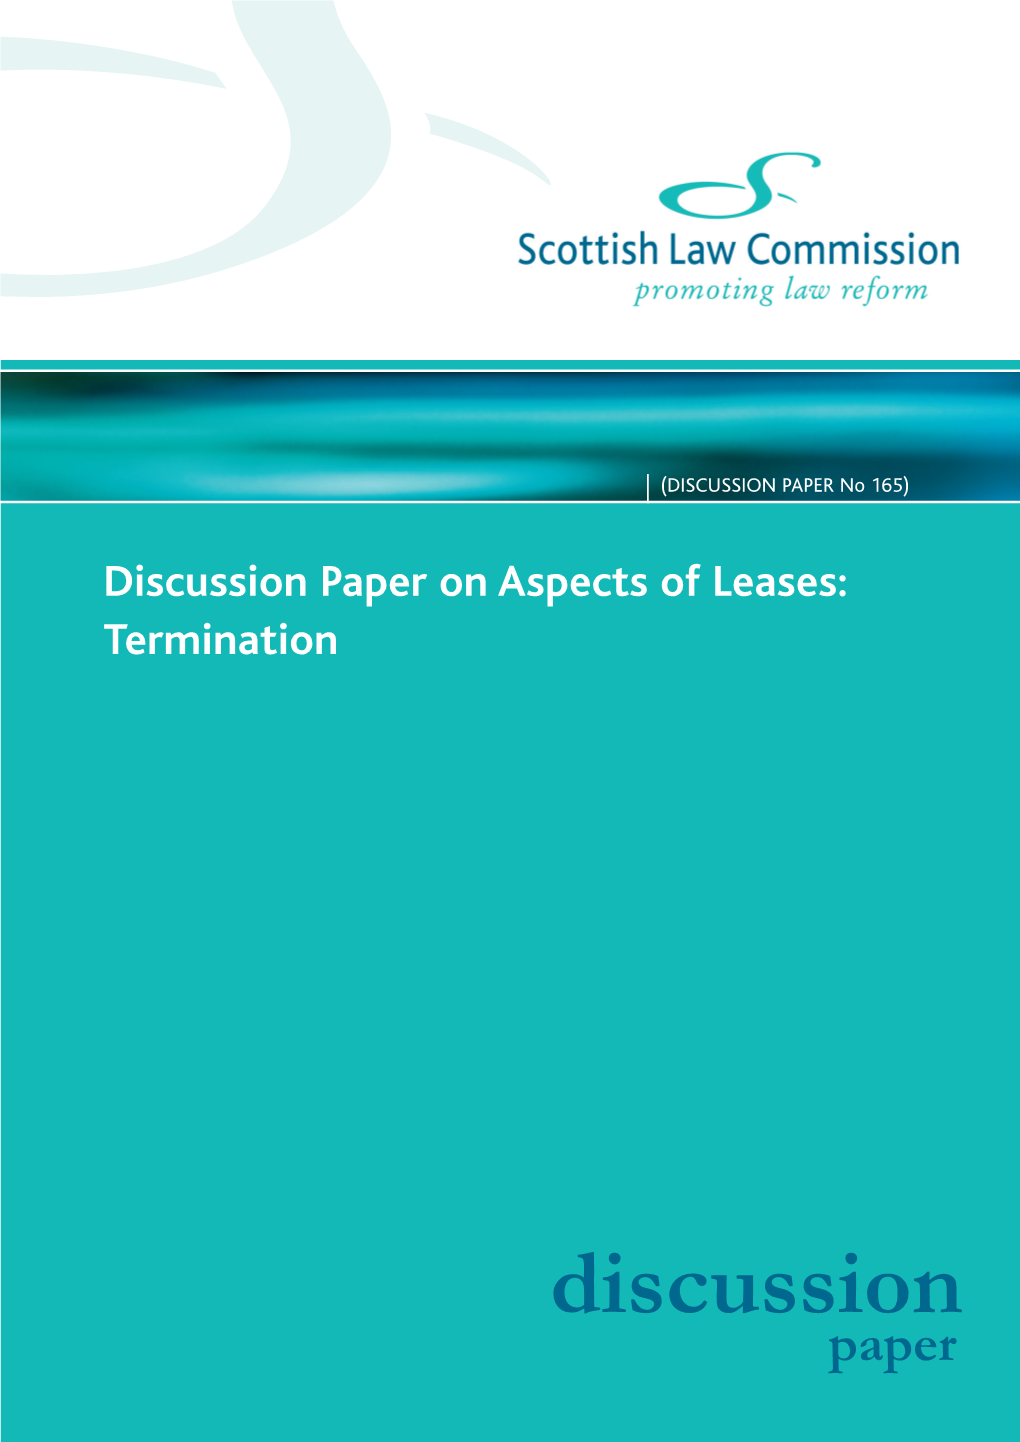 Discussion Paper on Aspects of Leases: Termination